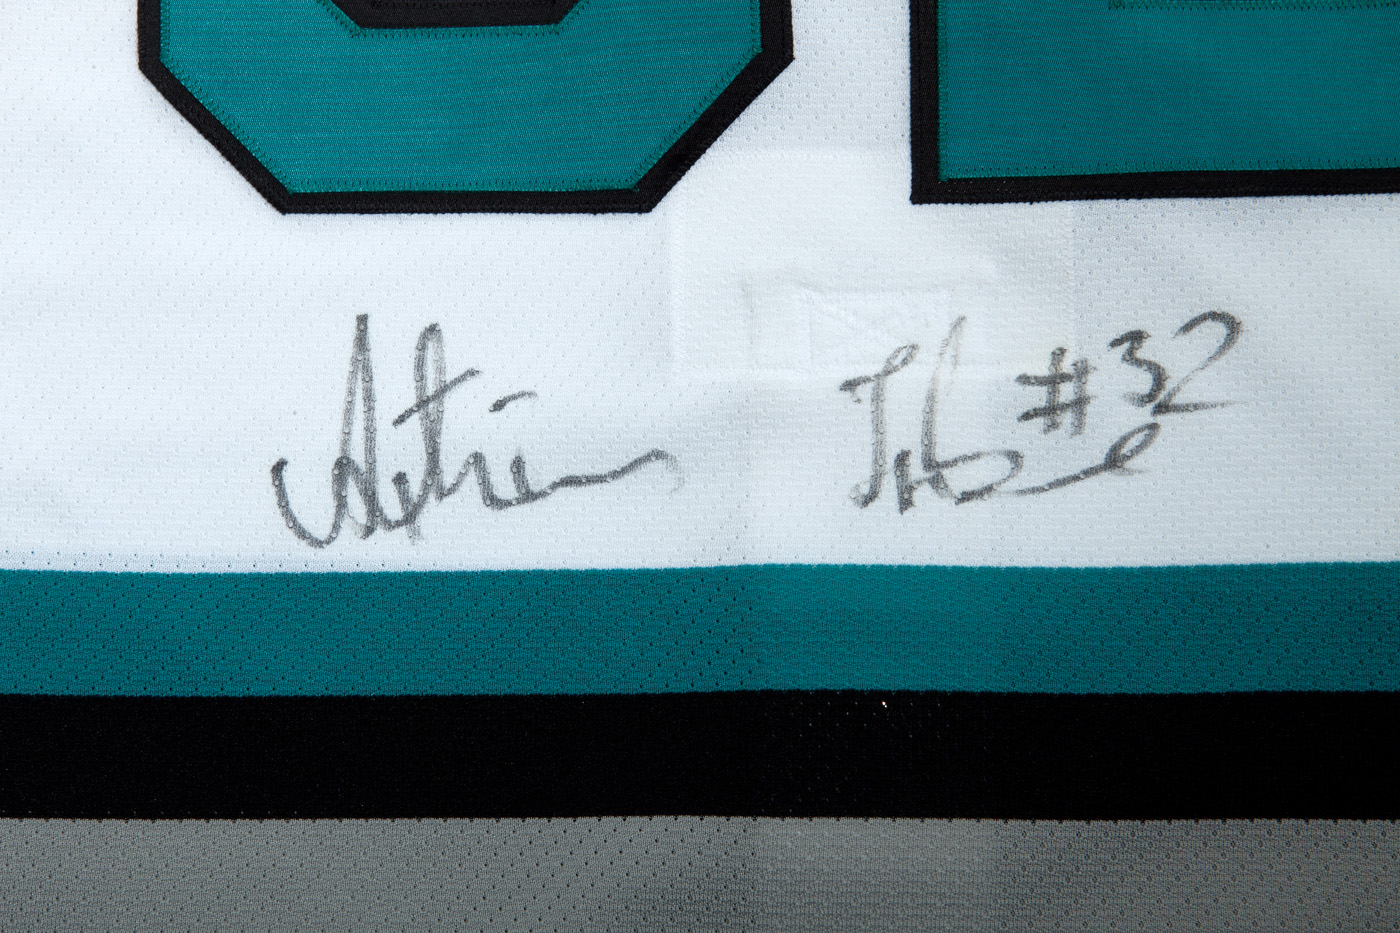 ARTURS IRBE Game issued/ Worn ? Used SAN JOSE SHARKS Jersey CCM Airknit